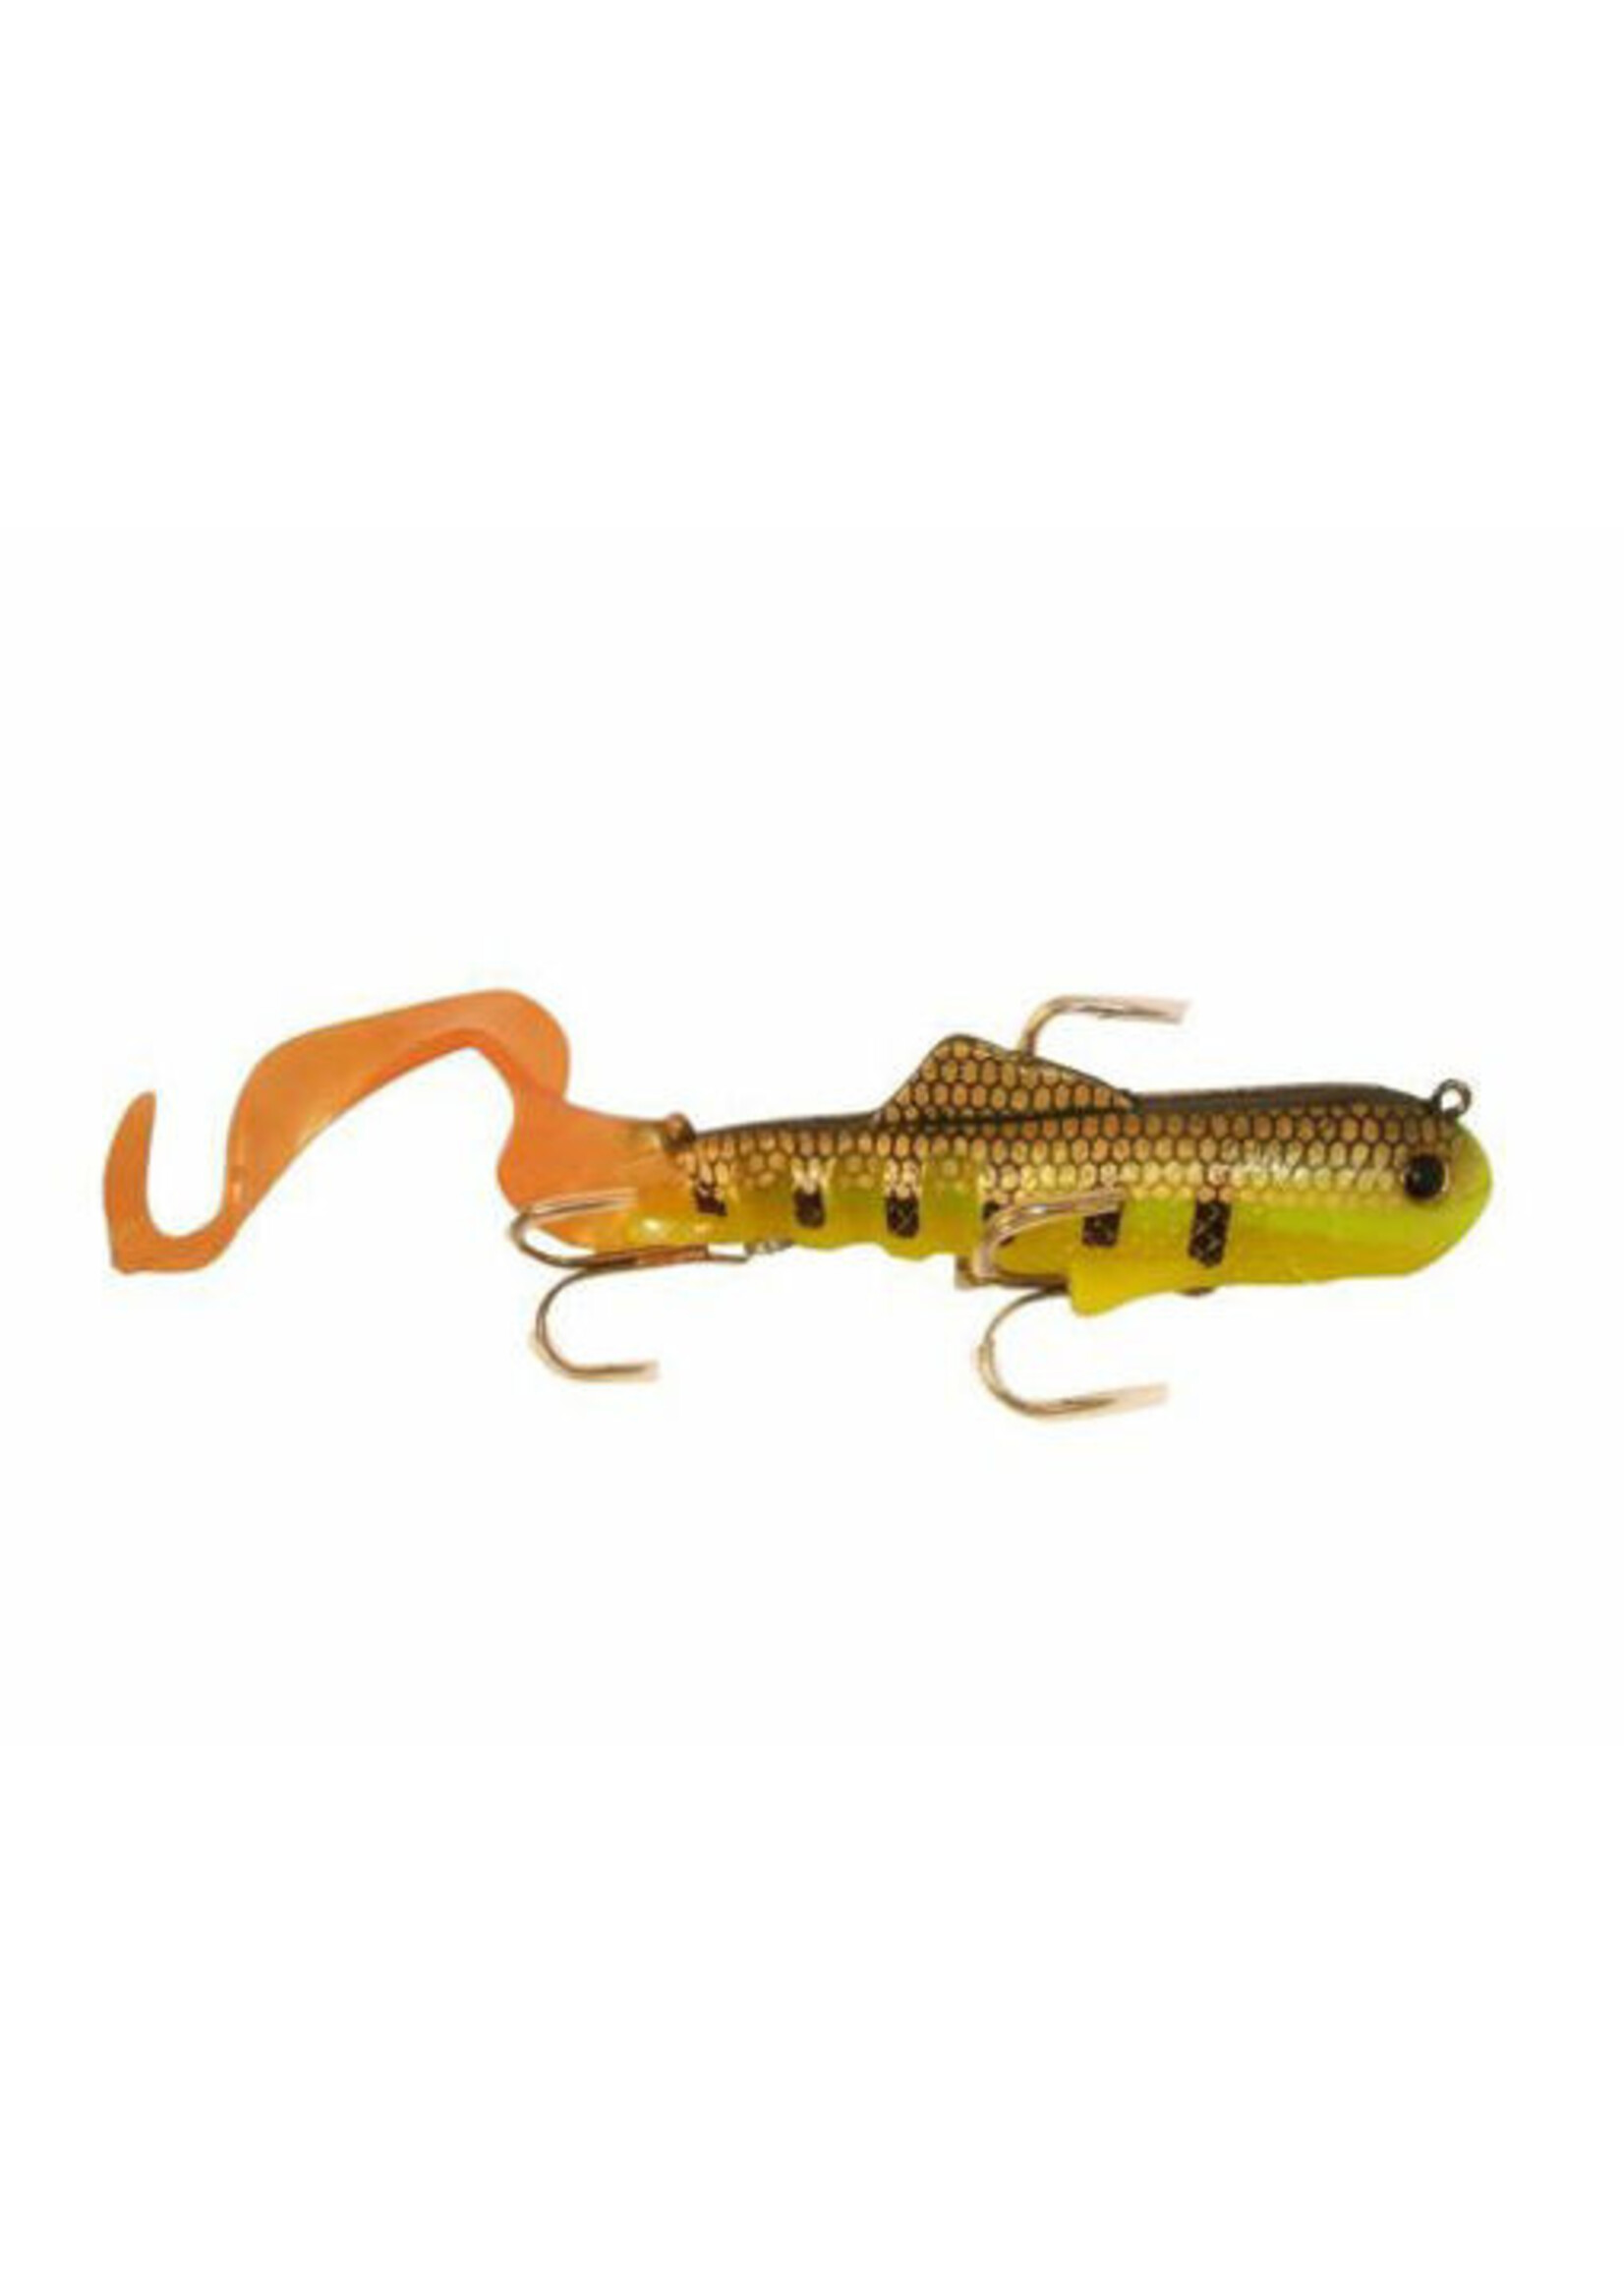 Tackle Industries Tackle Industries Super D